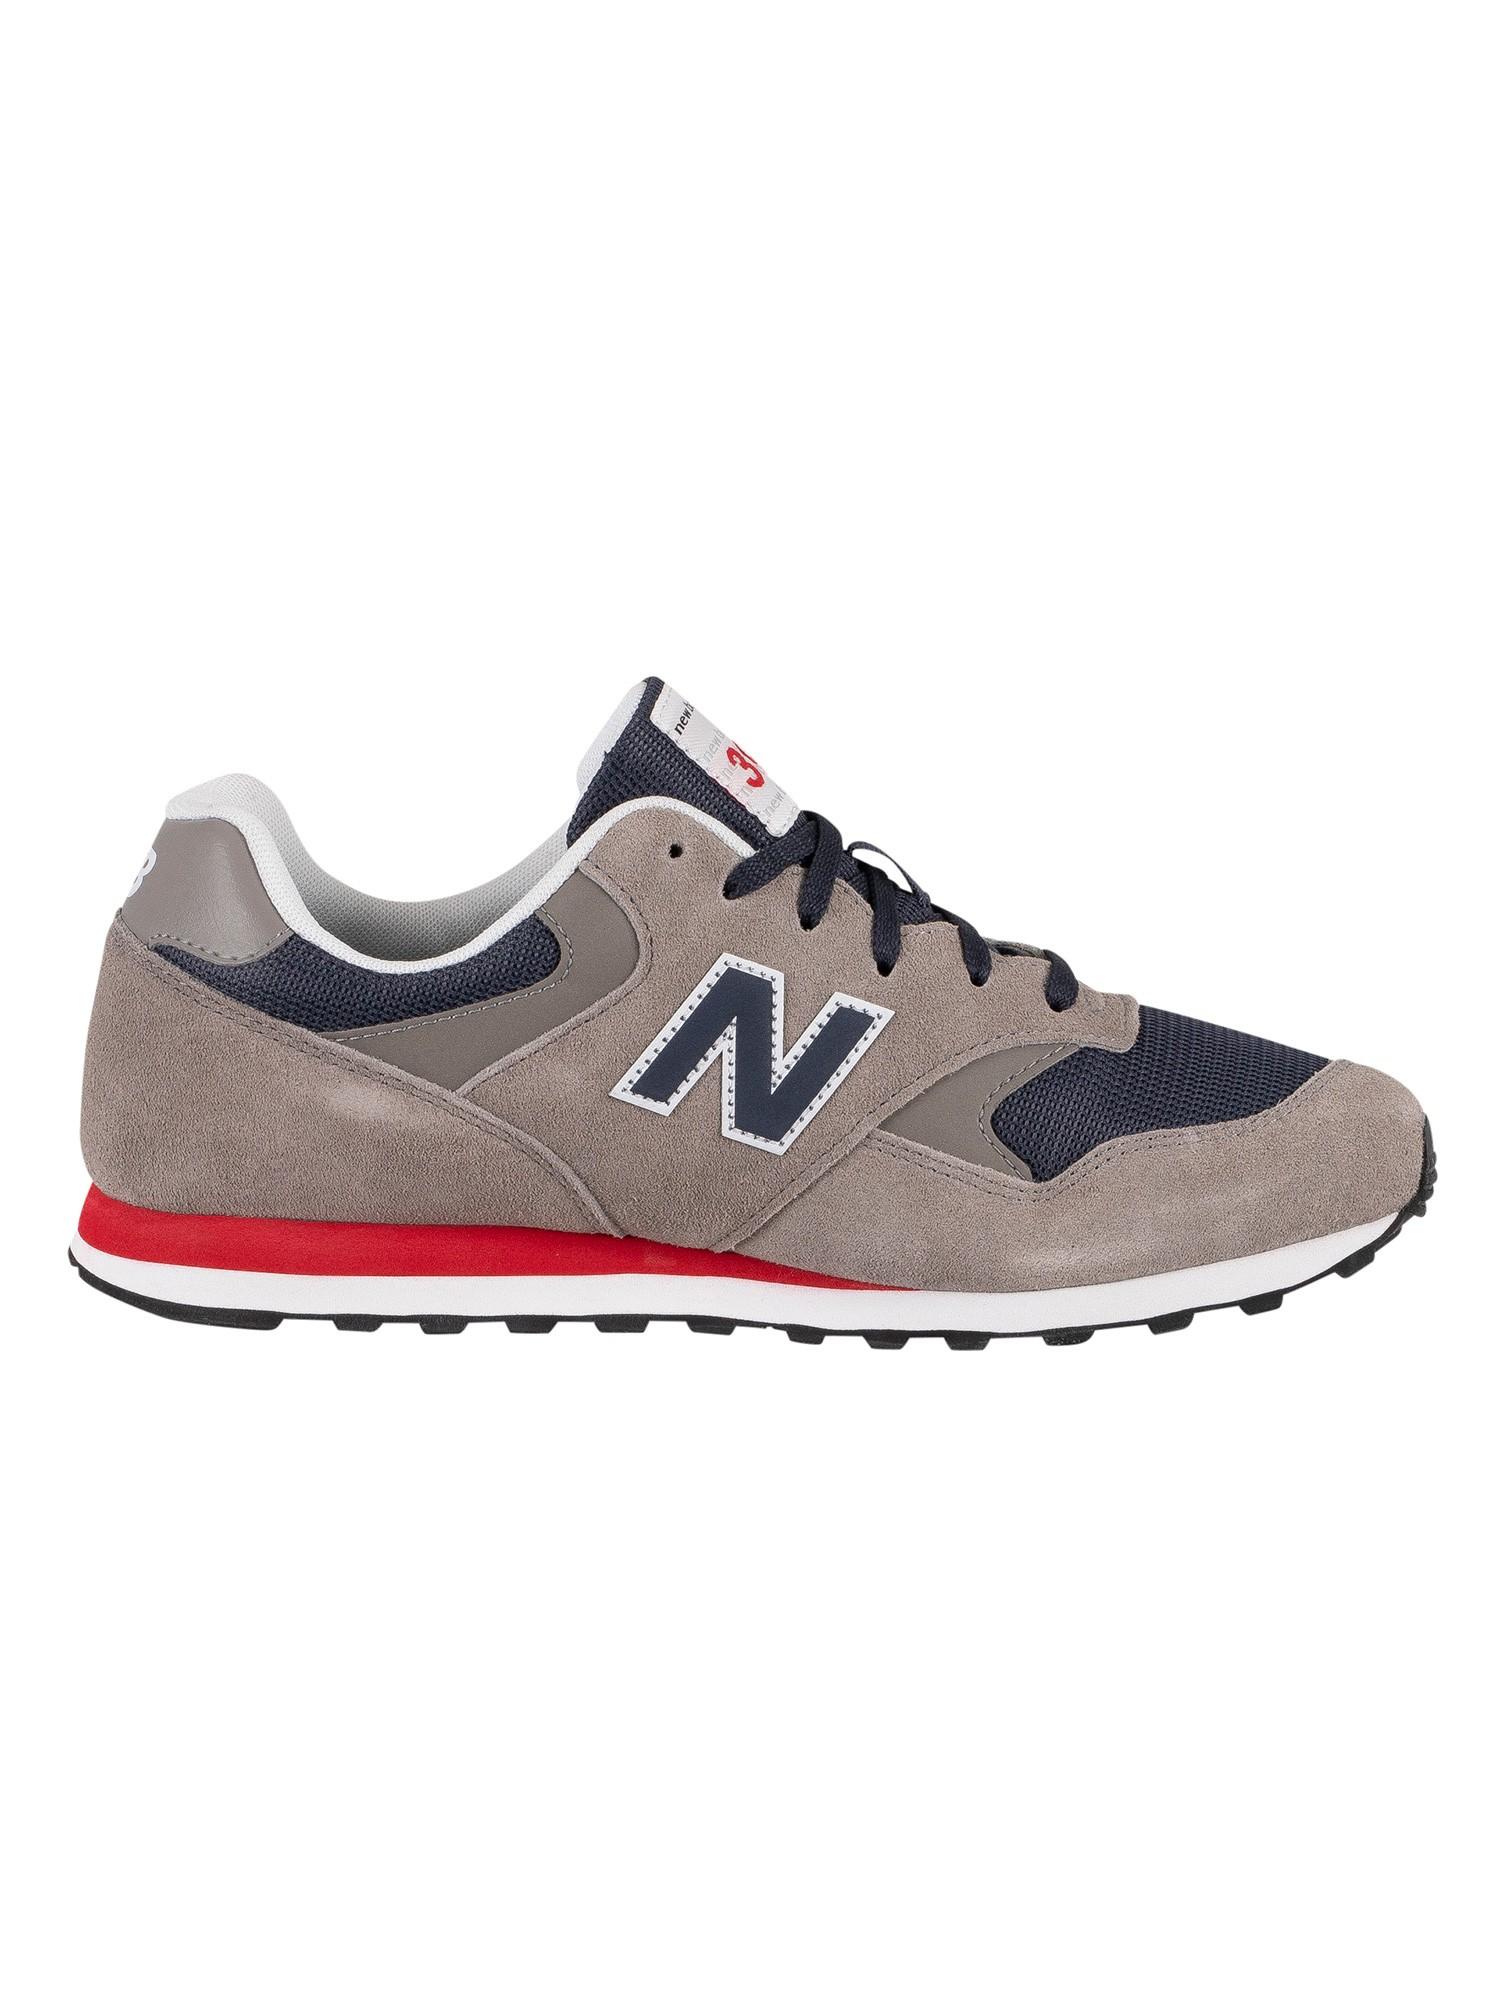 New Balance 393 in Blue for Men - Lyst